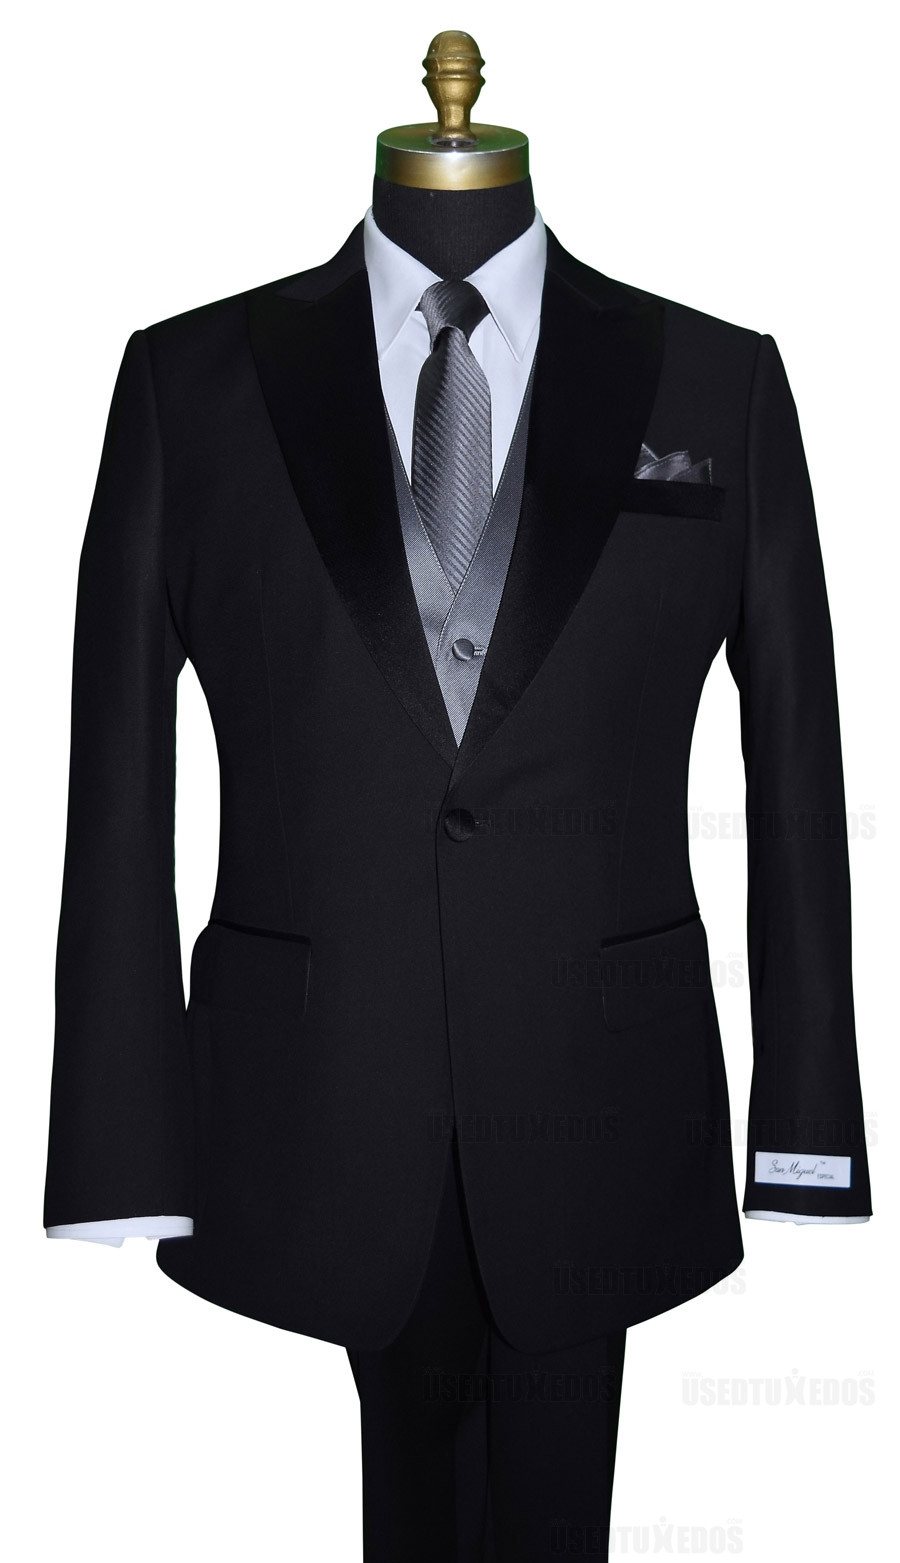 San Miguel peak lapel tuxedo with charcoal striped tie and vest